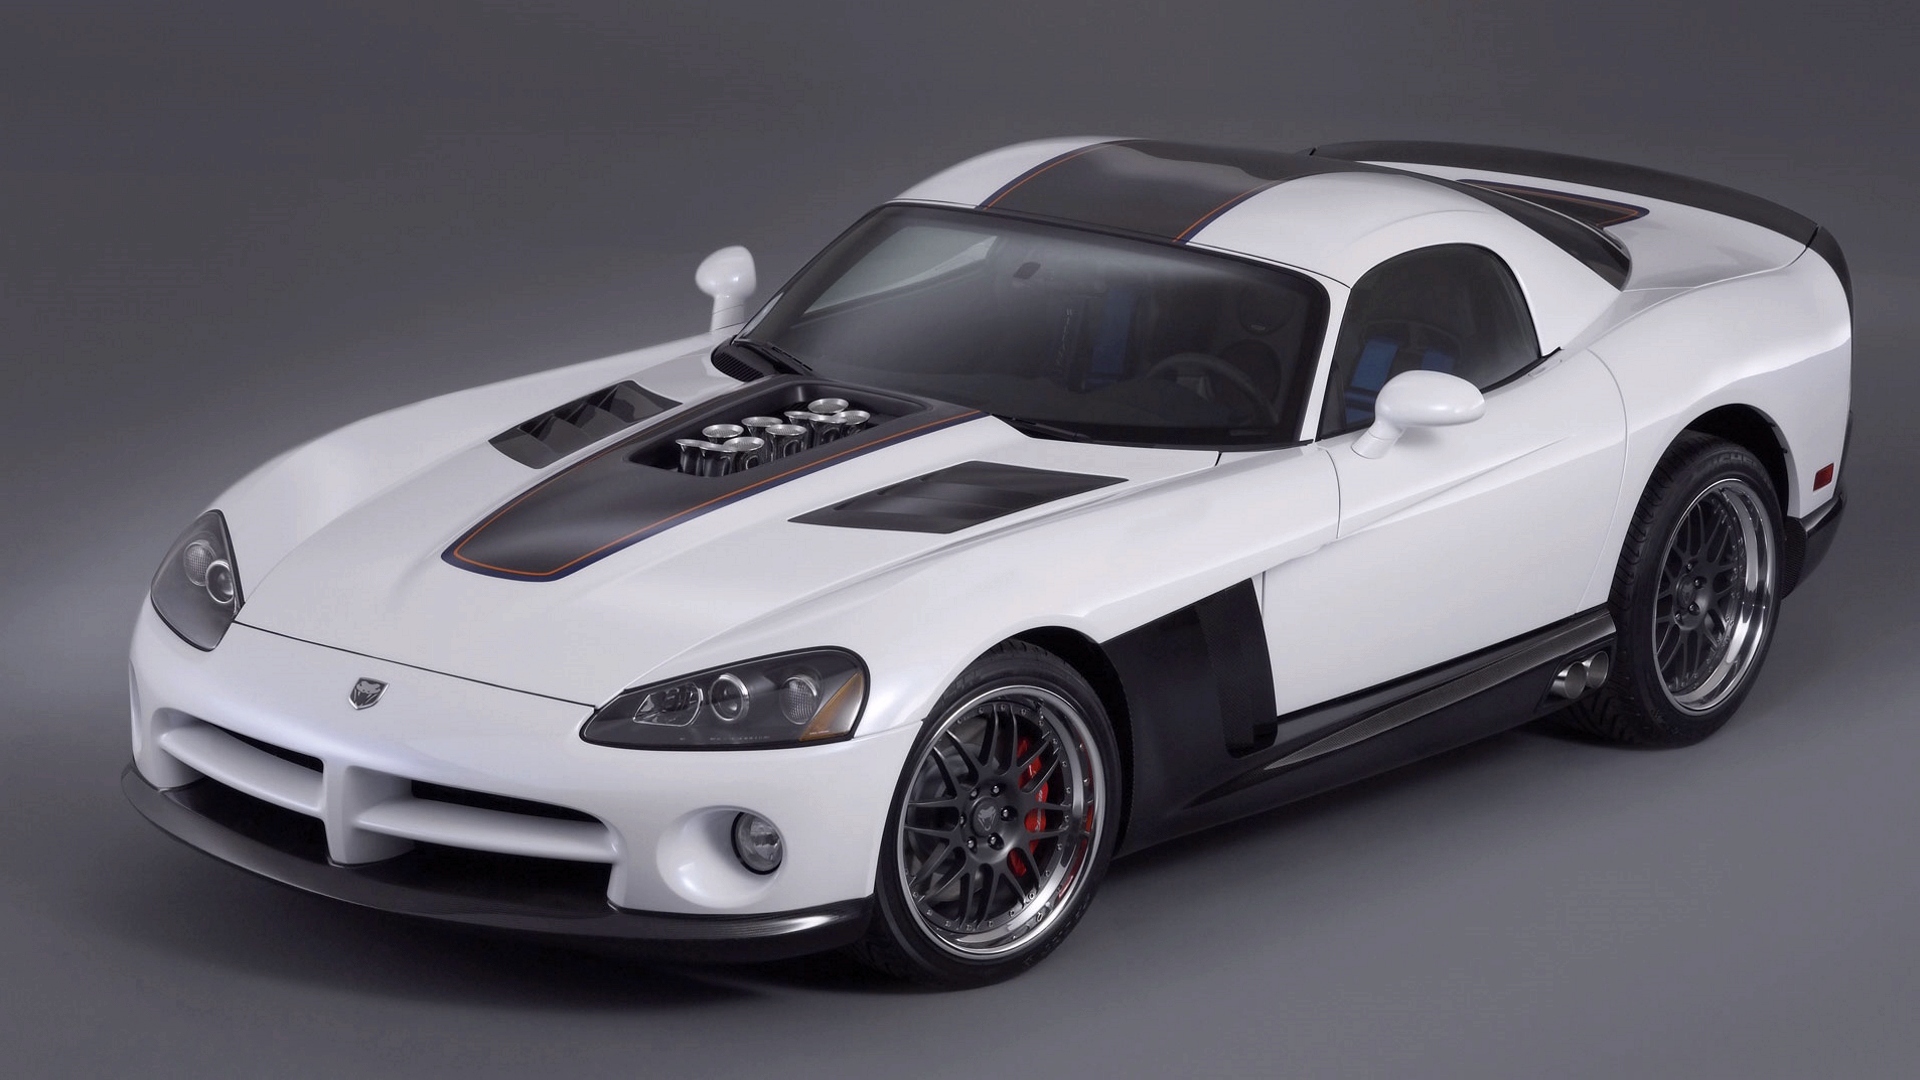 Wallpapers viper tuning sports car on the desktop